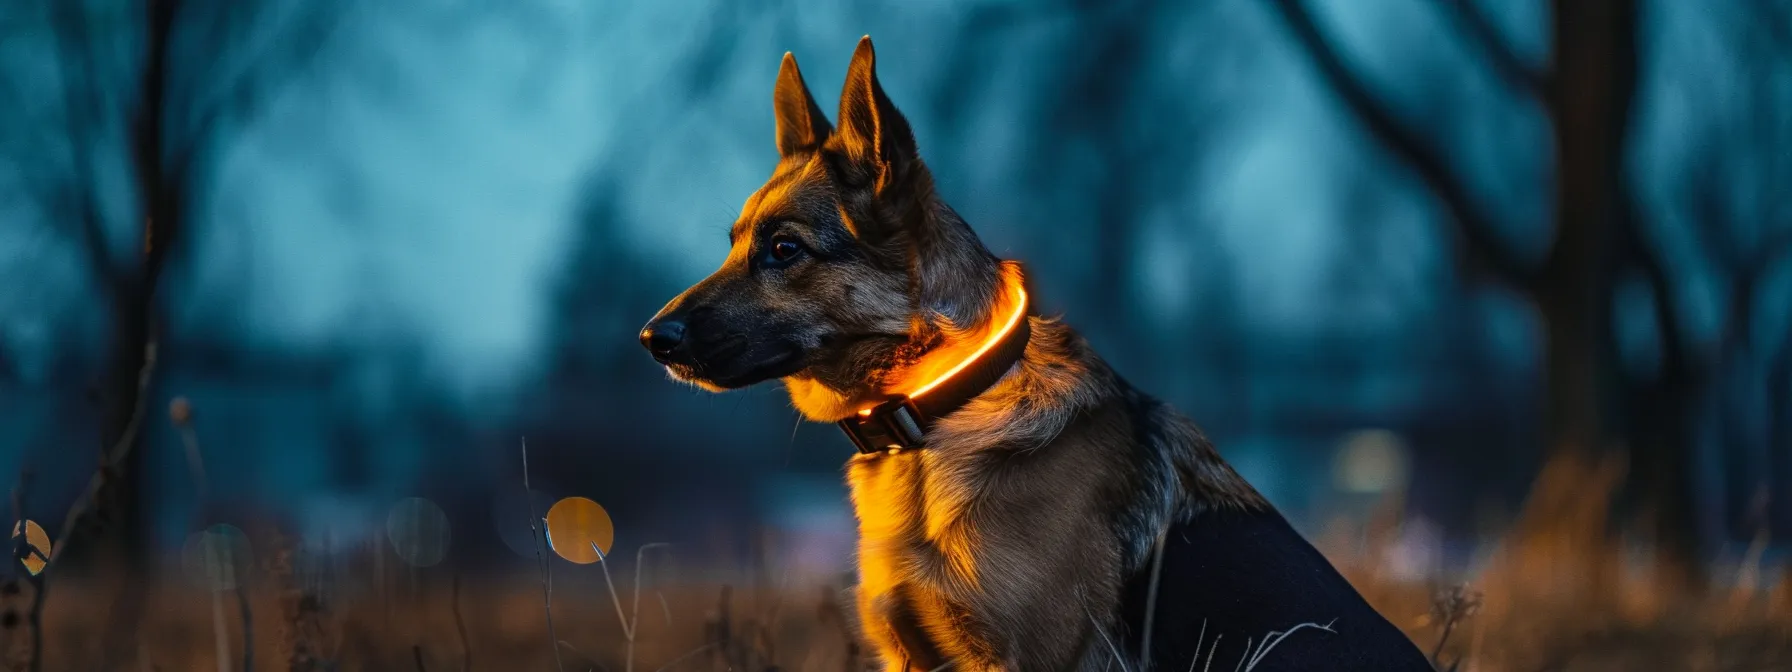 a dog wearing a glowing led collar, standing out in the dark night.